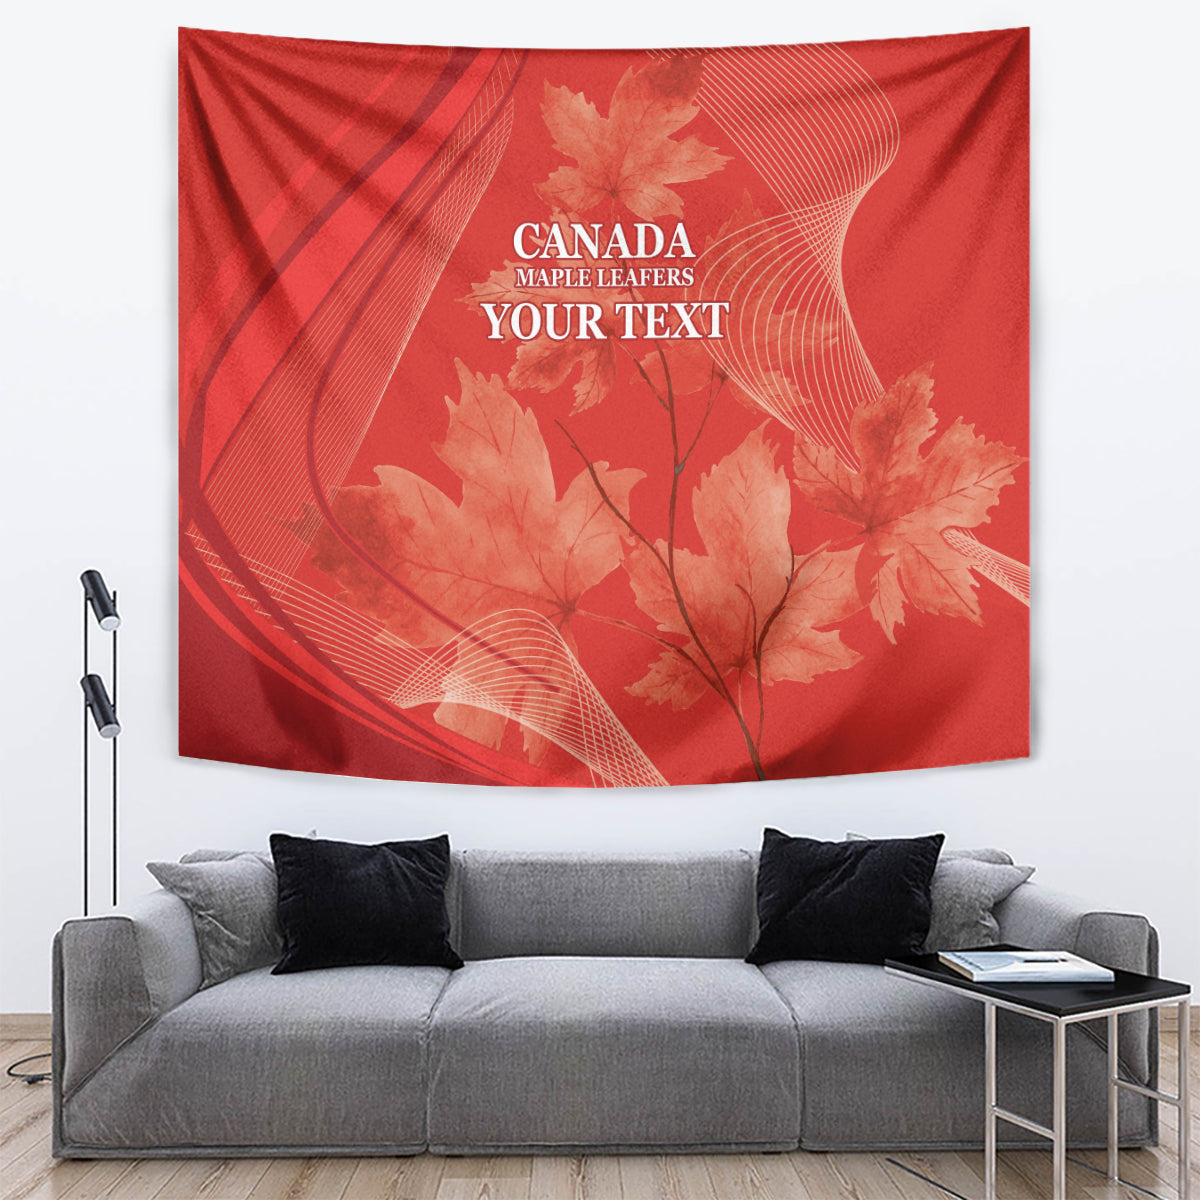 Canada Cricket World Cup 2024 Tapestry Maple Leafers Make Champions